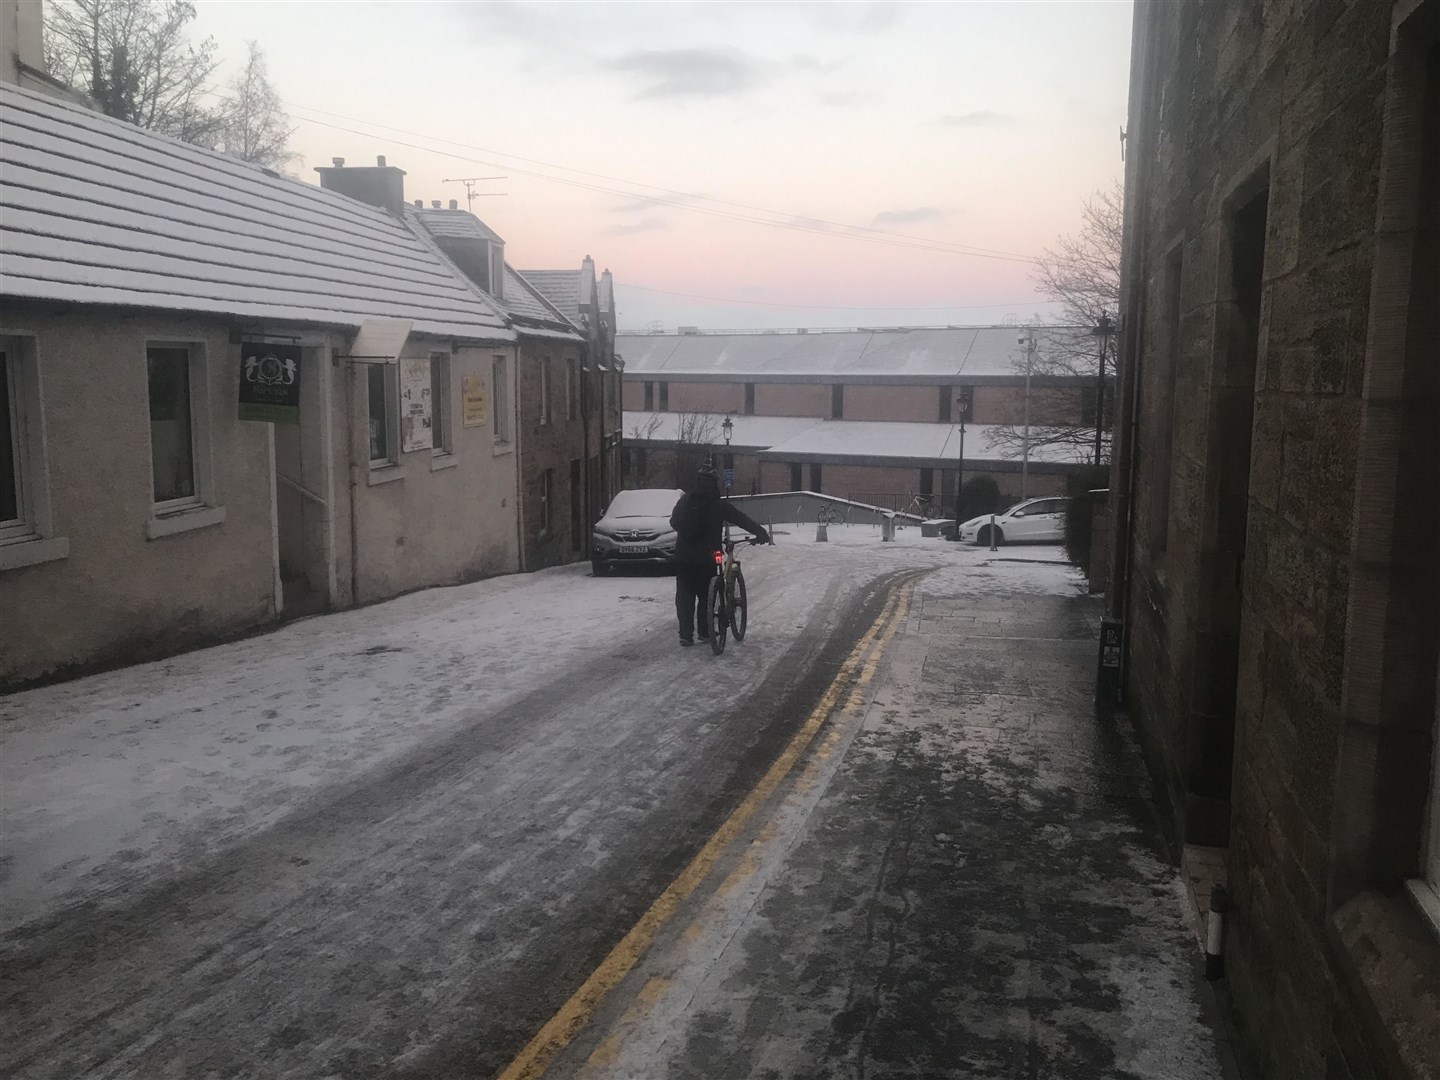 Snowy conditions in Stephen Street in Inverness.